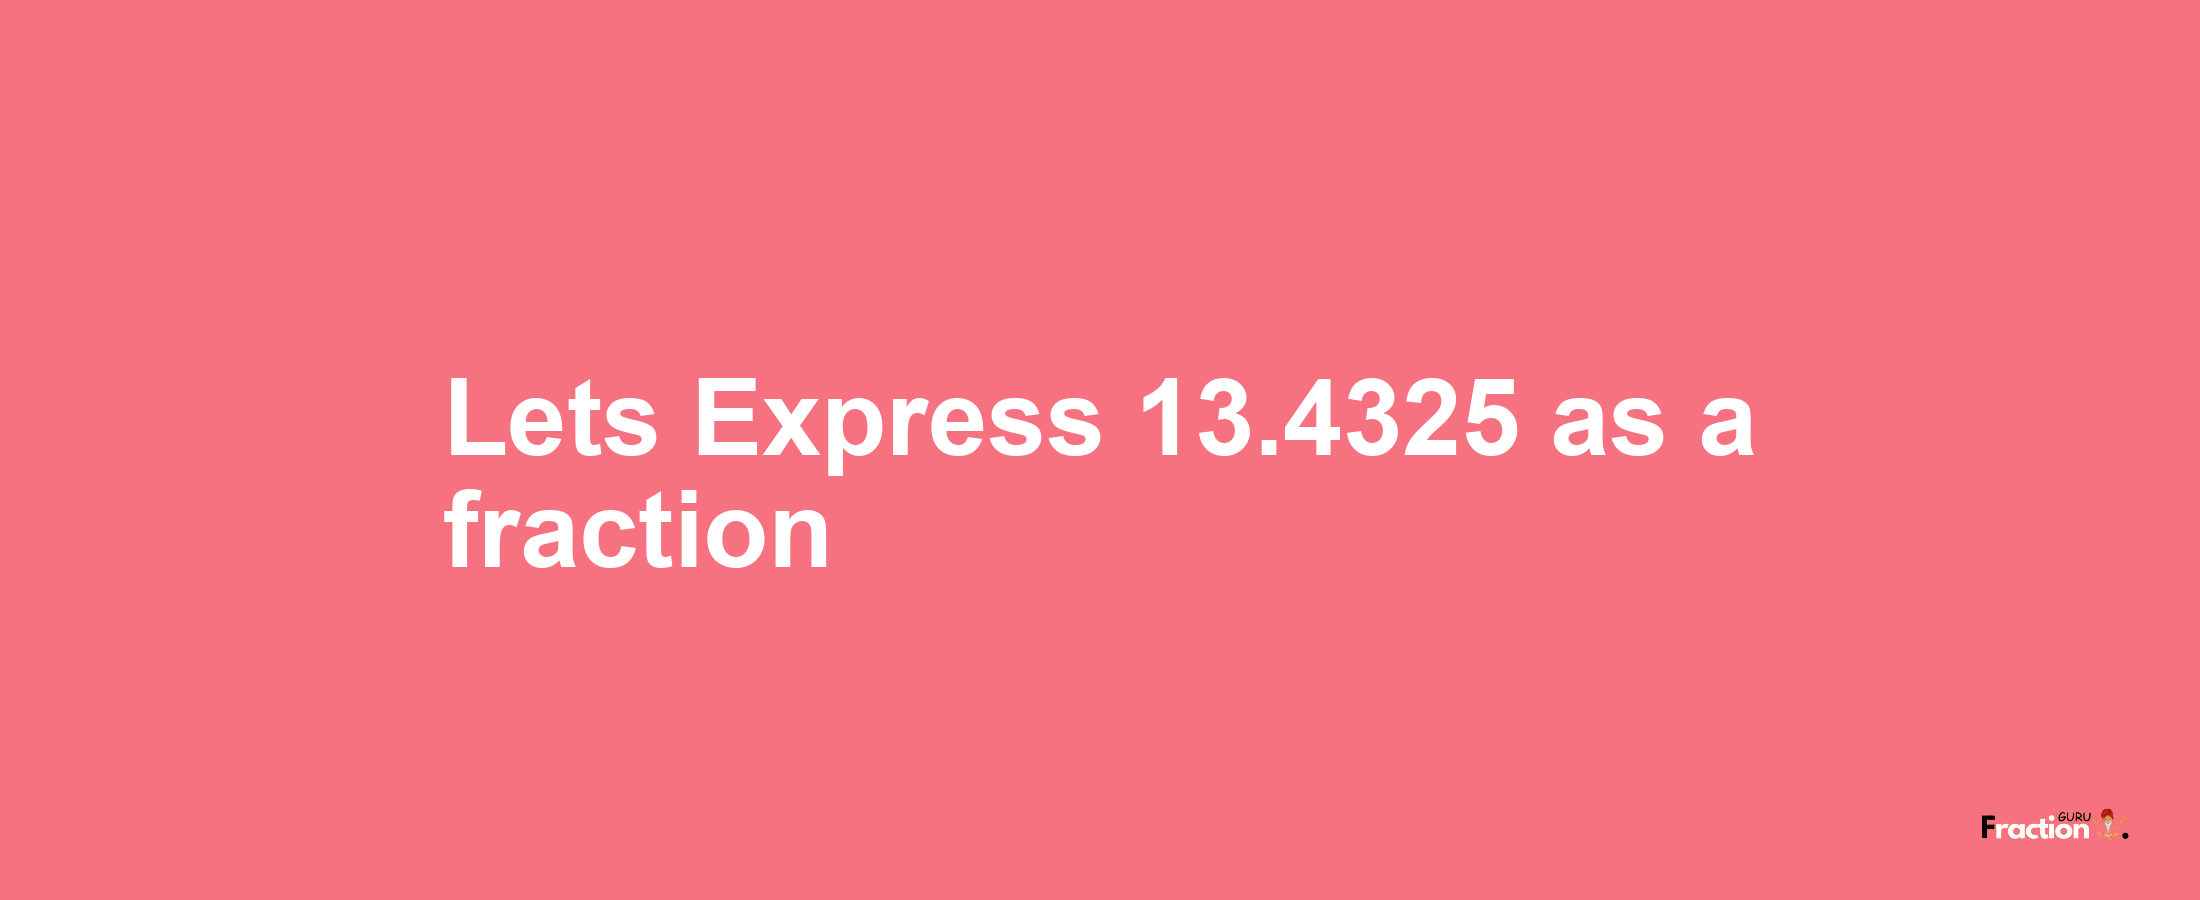 Lets Express 13.4325 as afraction